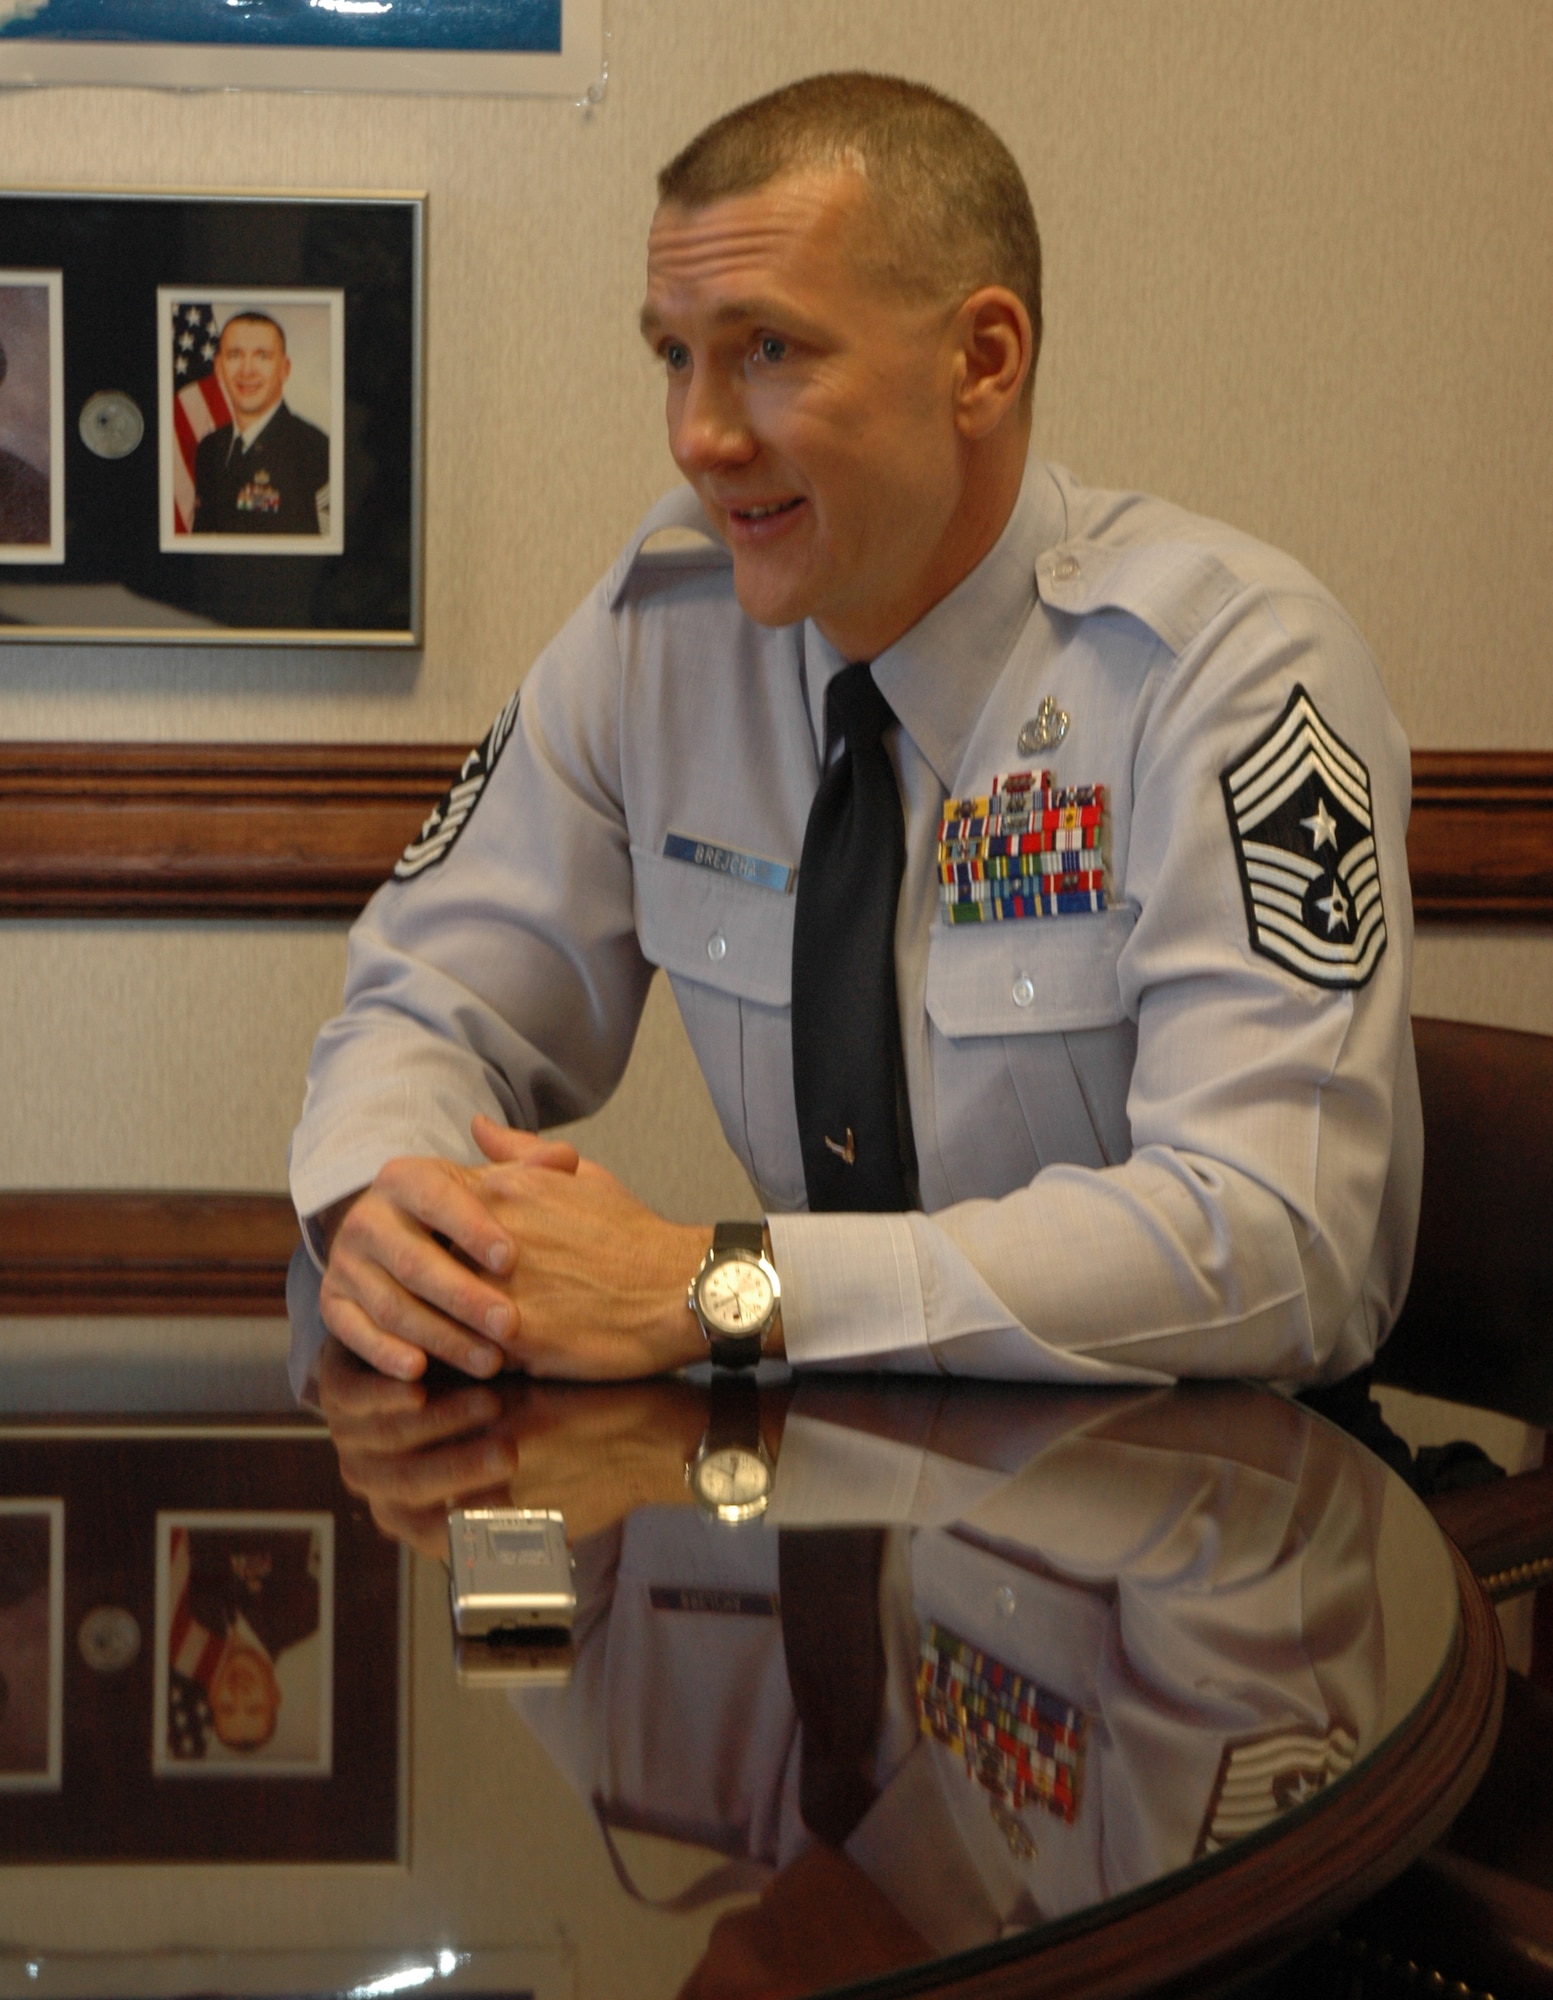 MINOT AIR FORCE BASE, N.D. -- Chief Master Sgt. Mark Brejcha, the new 91st Space Wing command chief, sits down to discuss his top priorities and what it will be like being the 91st SW’s command chief during an interview in his office Nov. 14. According to Chief Brejcha, he is humble to be here and believes Minot Air Force Base is second to none. Chief Brejcha entered the Air Force in May 1981 and has been a chief master sergeant since August 2002. He assumed his new duties Oct. 30. (U.S. Air Force photo by Airman Wesley Wright)